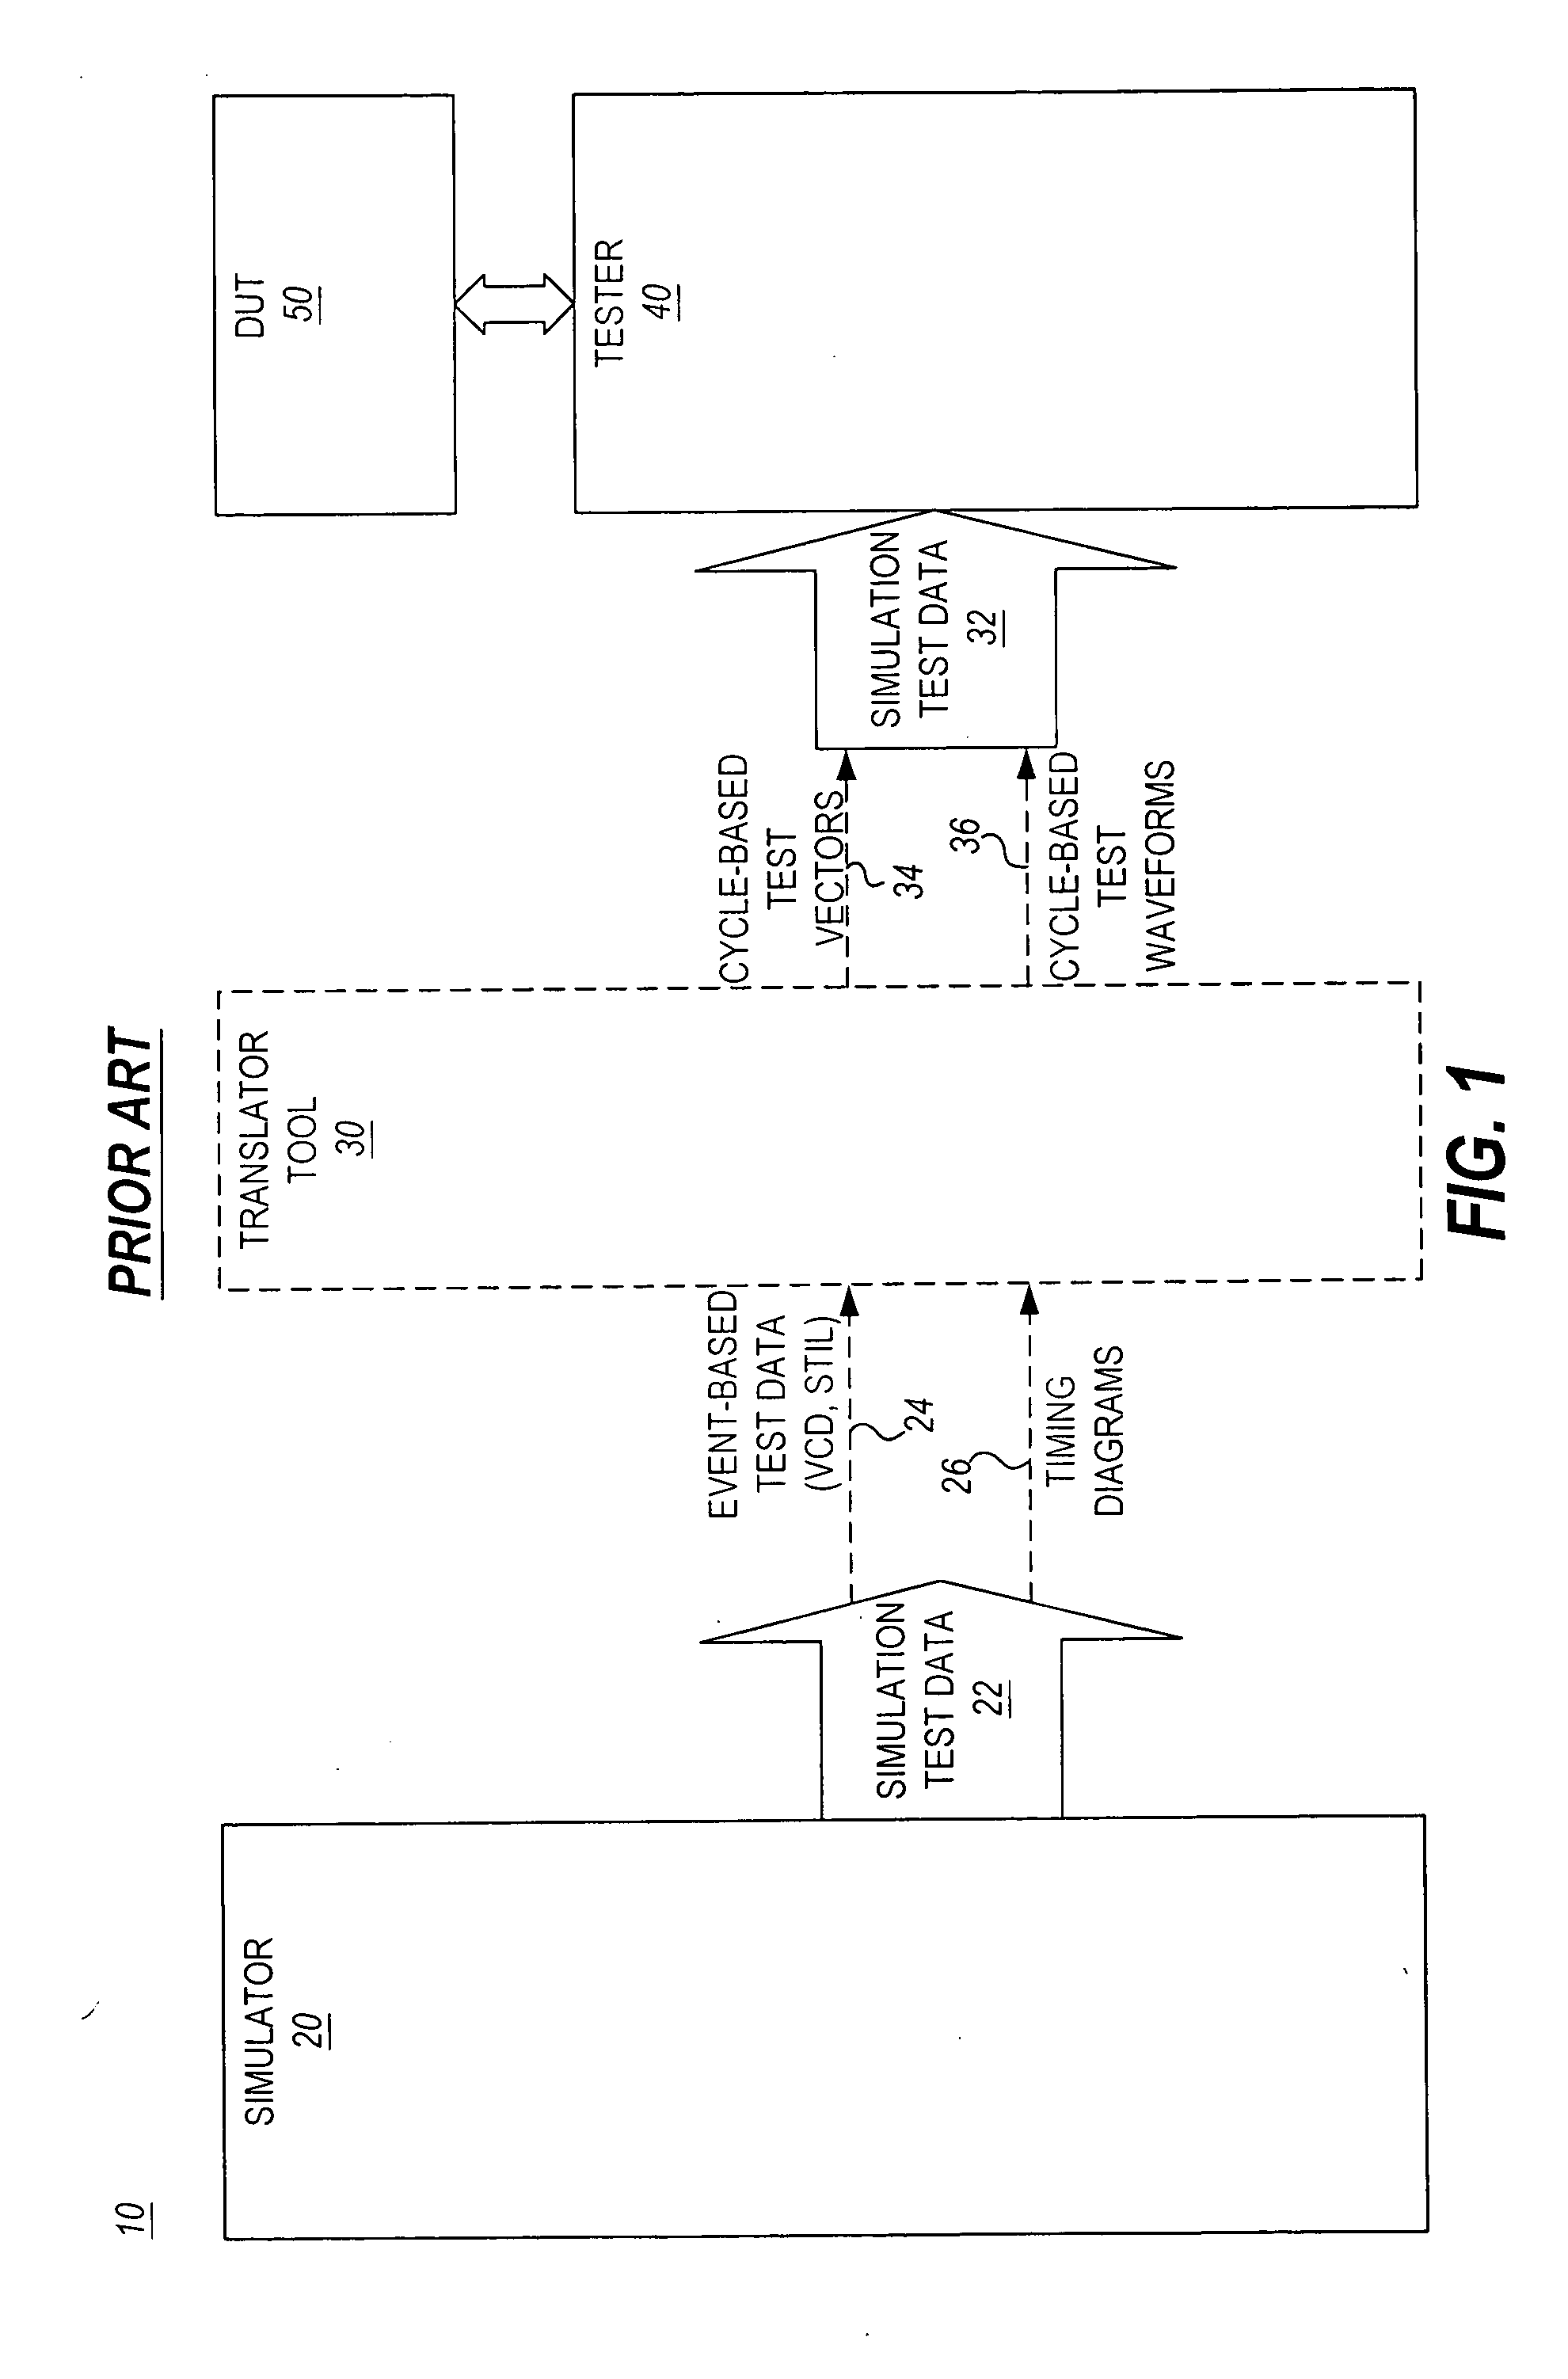 Verification of integrated circuit tests using test simulation and integrated circuit simulation with simulated failure